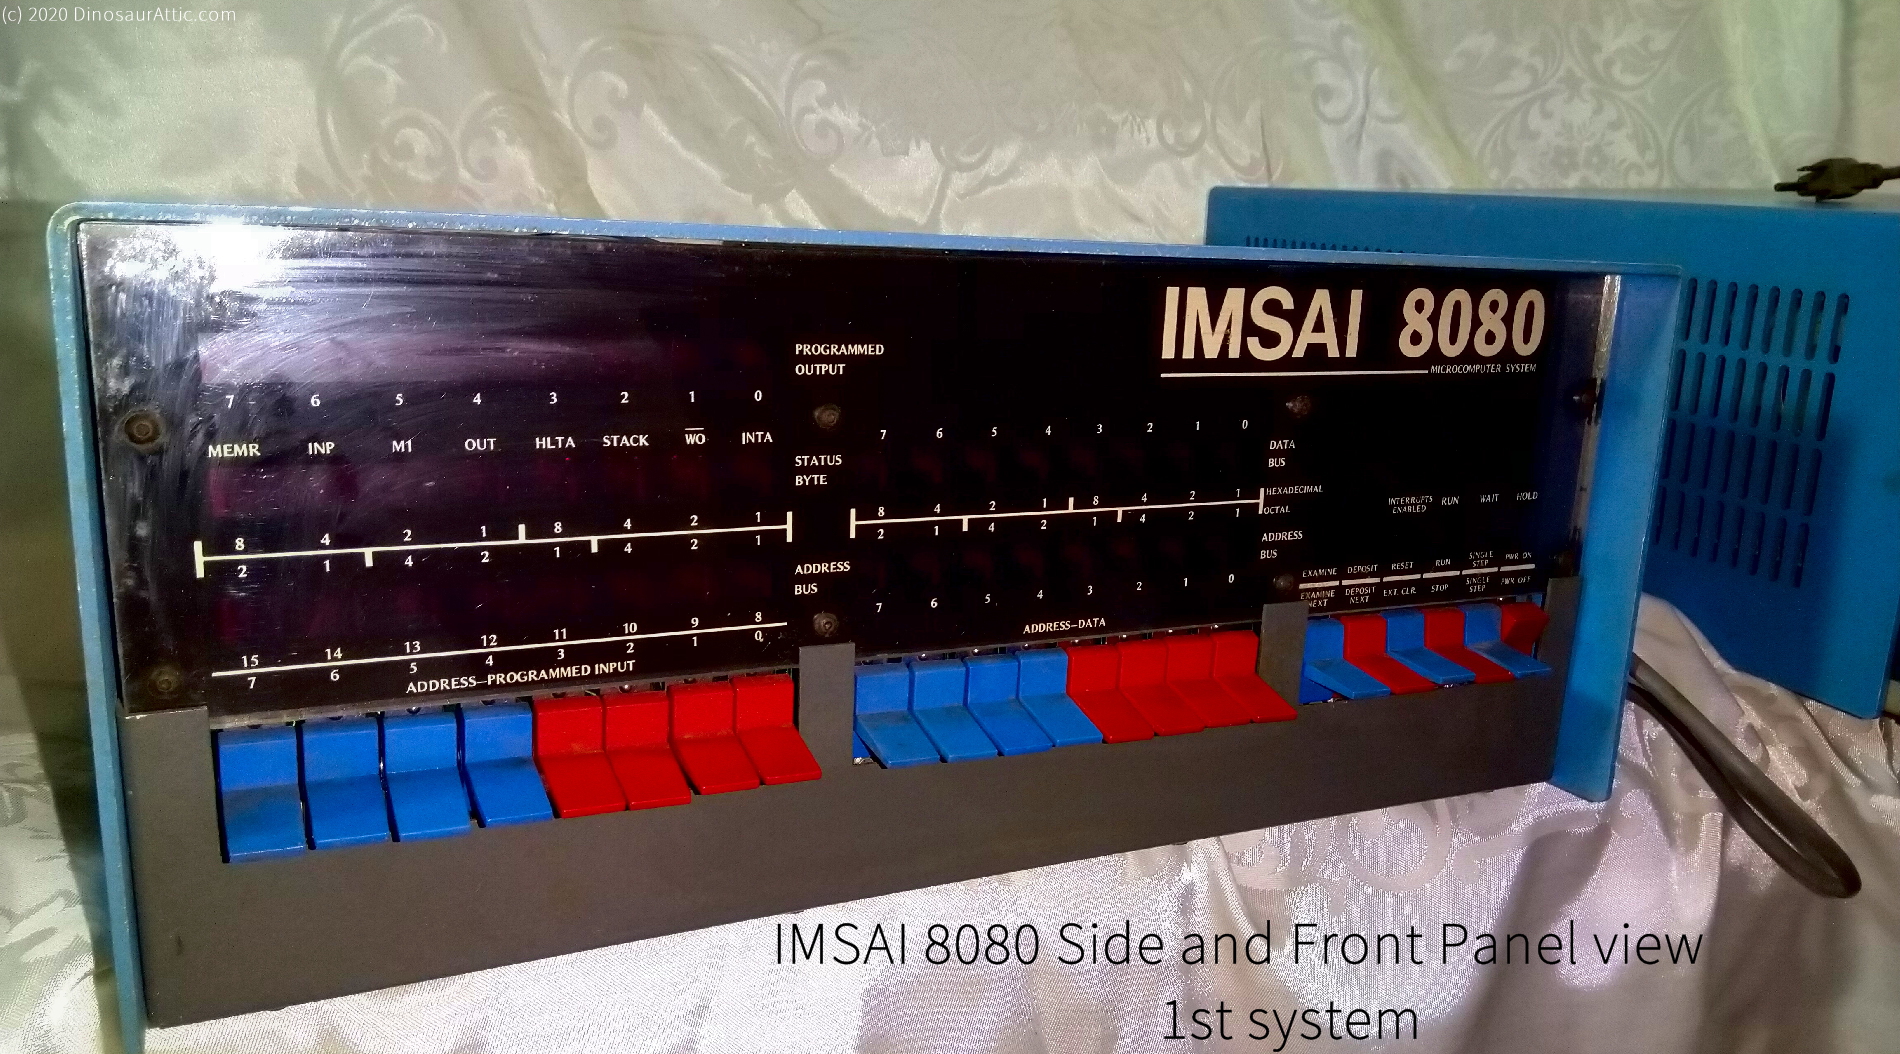 <b>IMSAI 8080 Side and Front Panel view 1st system</b>